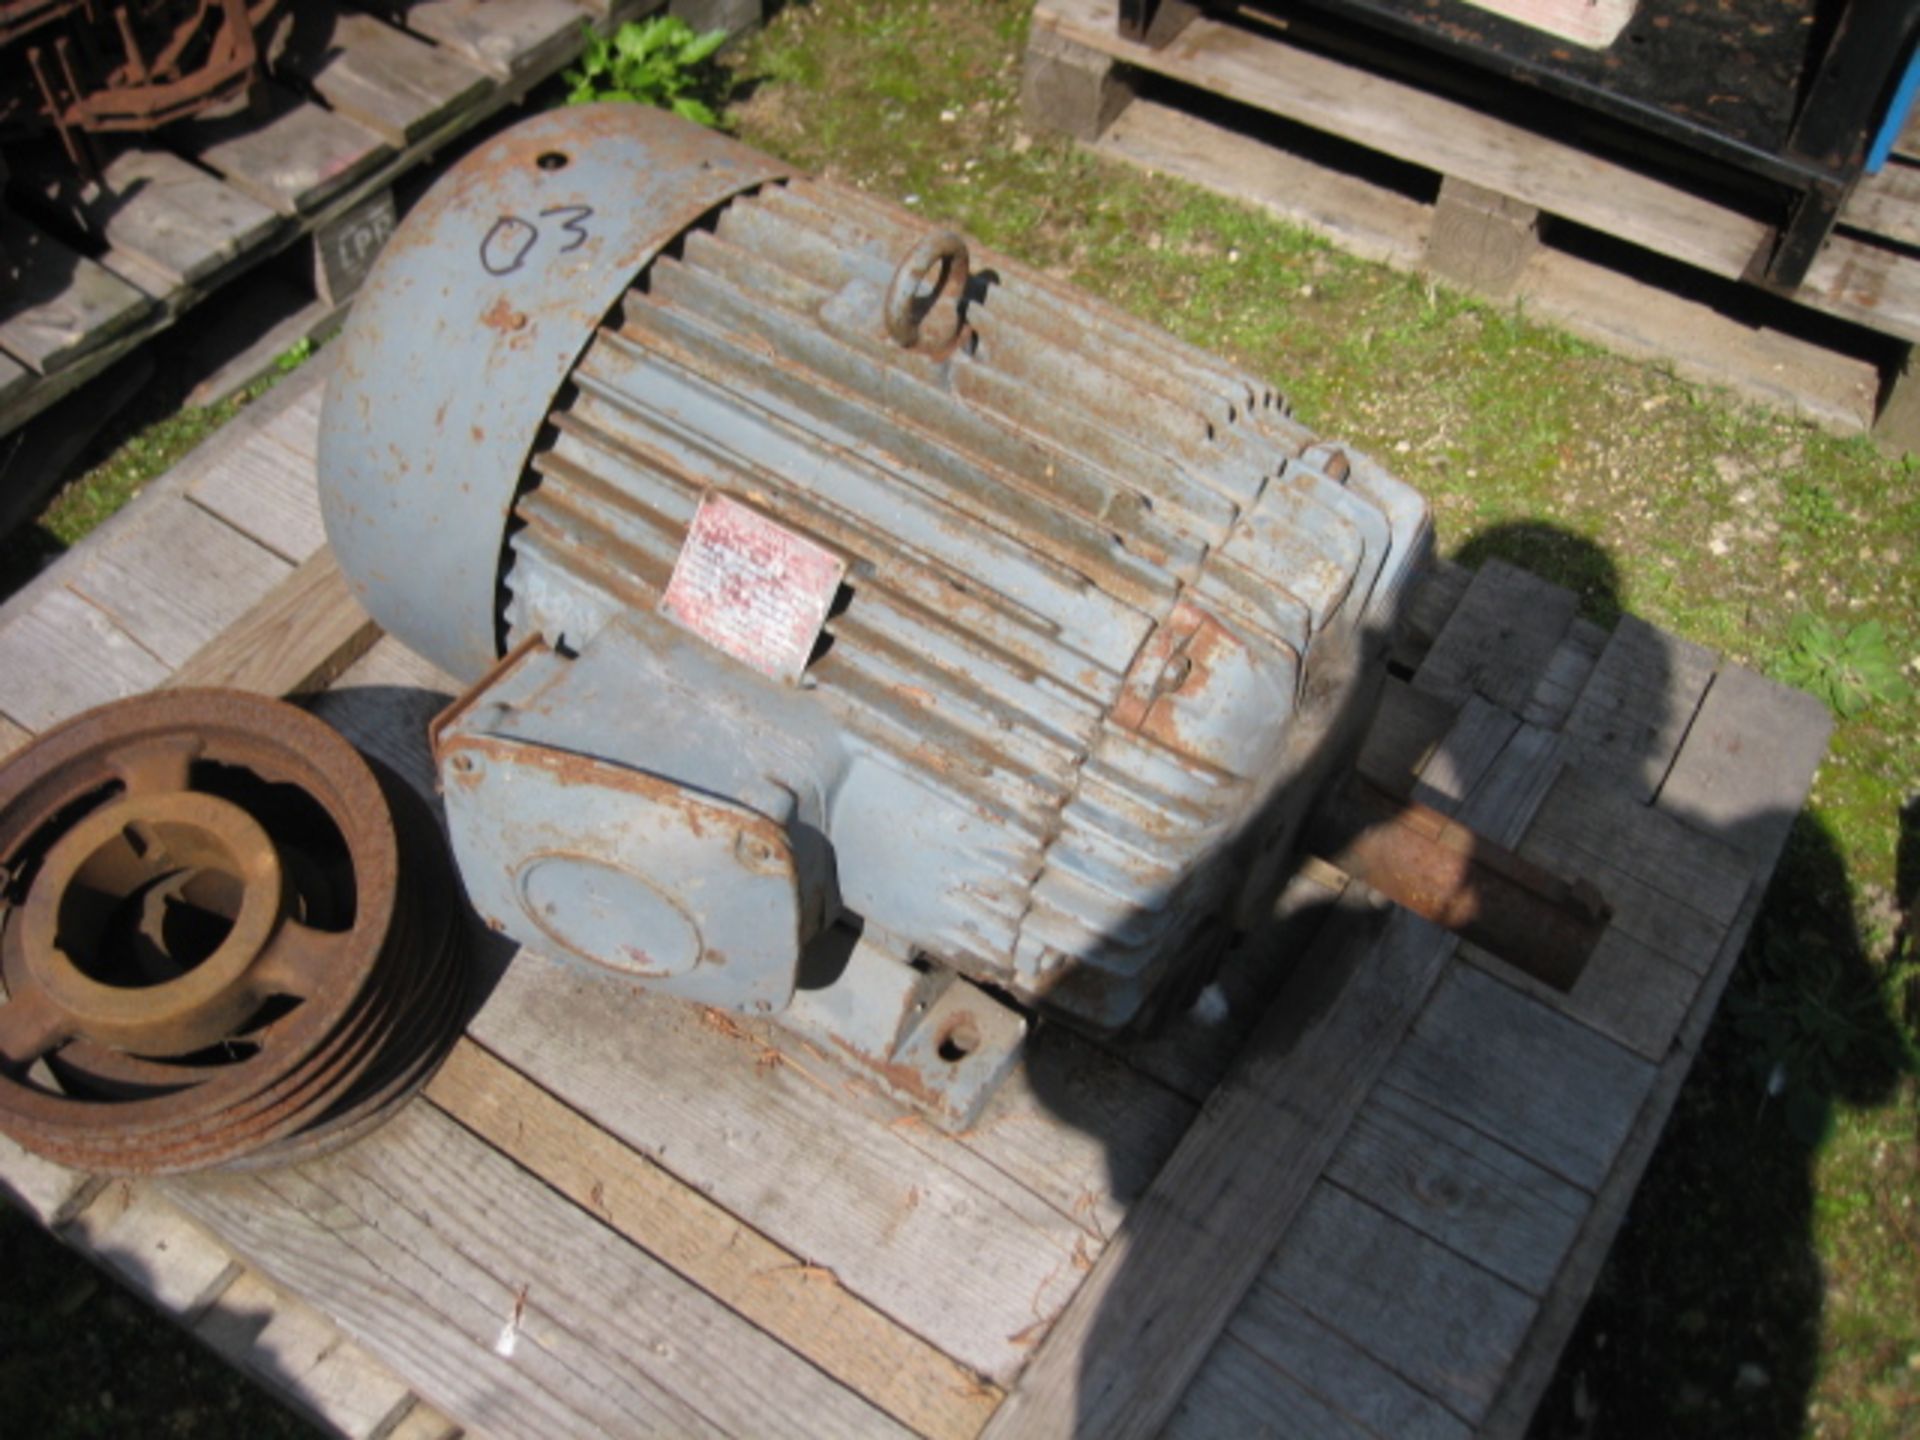 English Electric TEFC Foot Mounted Motor, 25HP, 970rpm, loading free of charge - yes, lot located at